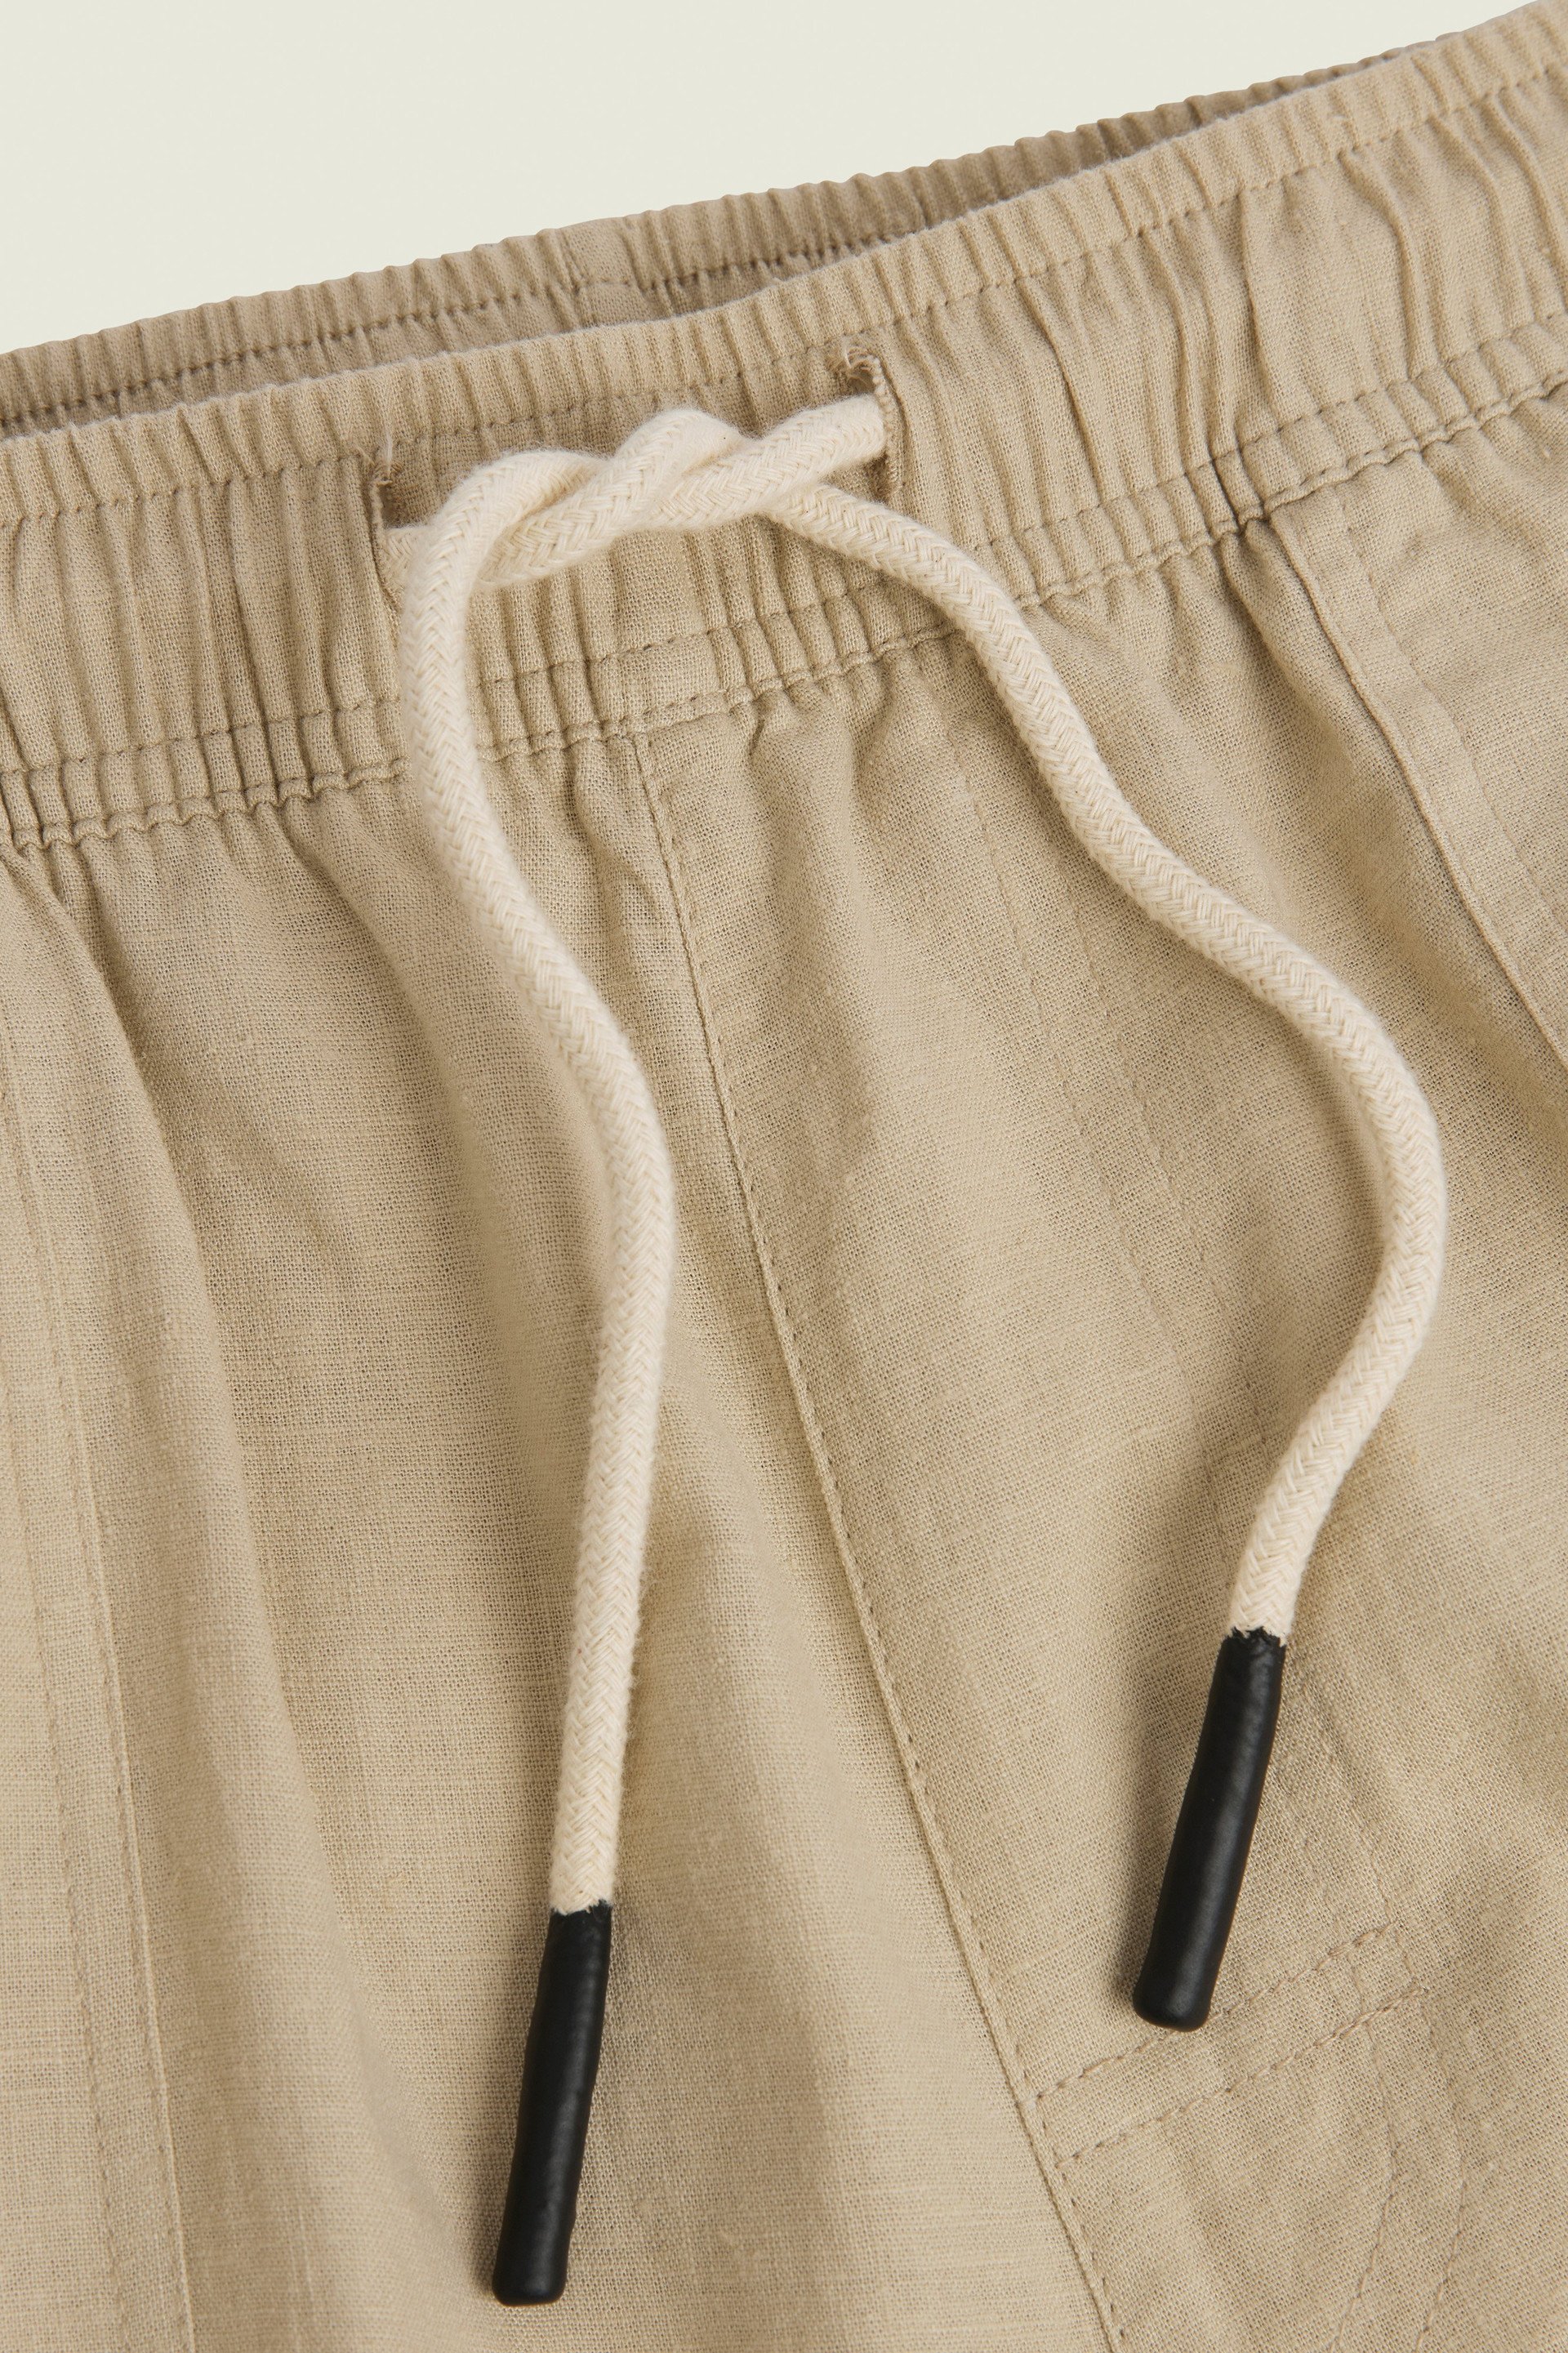 Cotton-Linen Cargo Pants - OBSOLETES DO NOT TOUCH